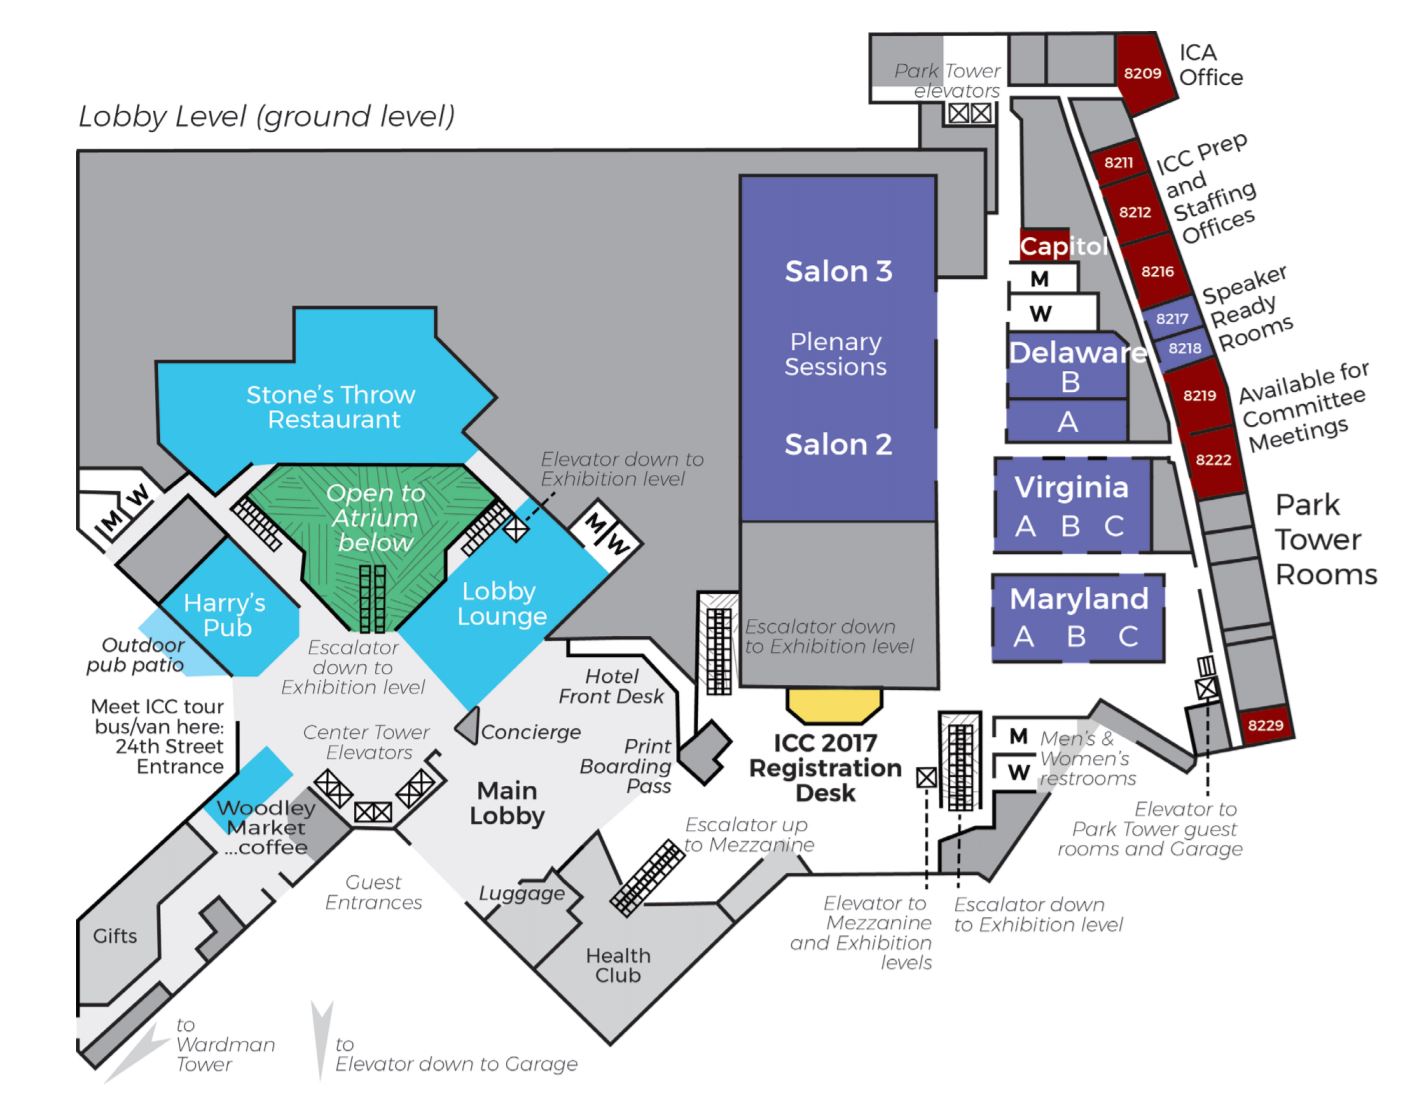 example of an indoor map: Washington DC Marriott from the 2017 International Cartographic Conference